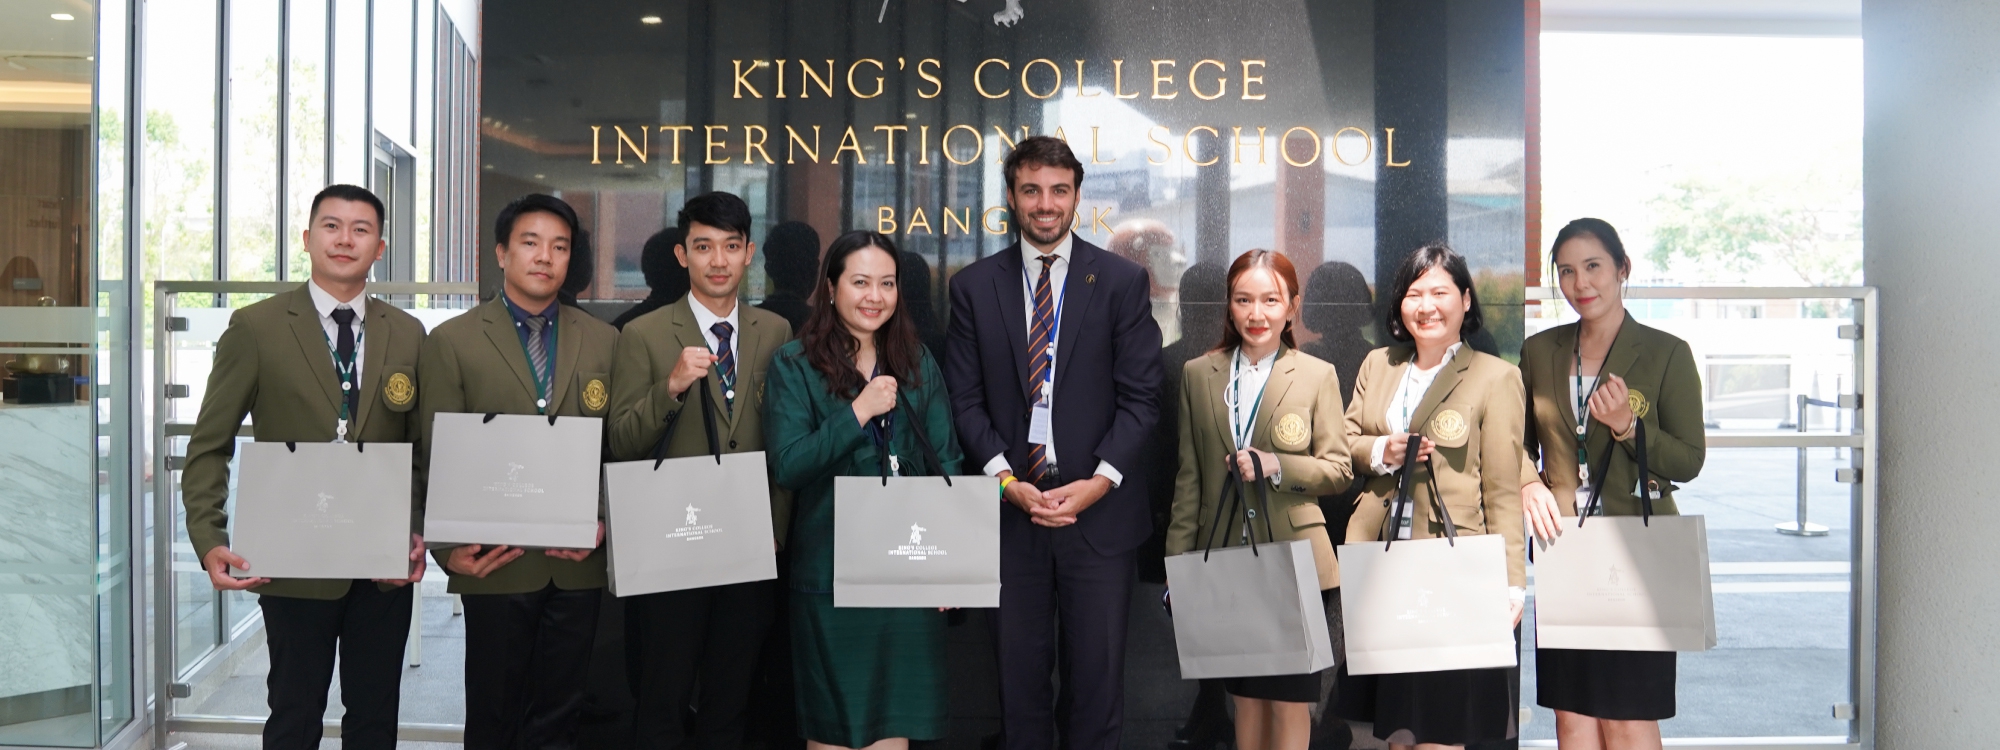 King’s Bangkok welcomed professor and doctoral students from the Faculty of Education, Kasetsart University to a school visit